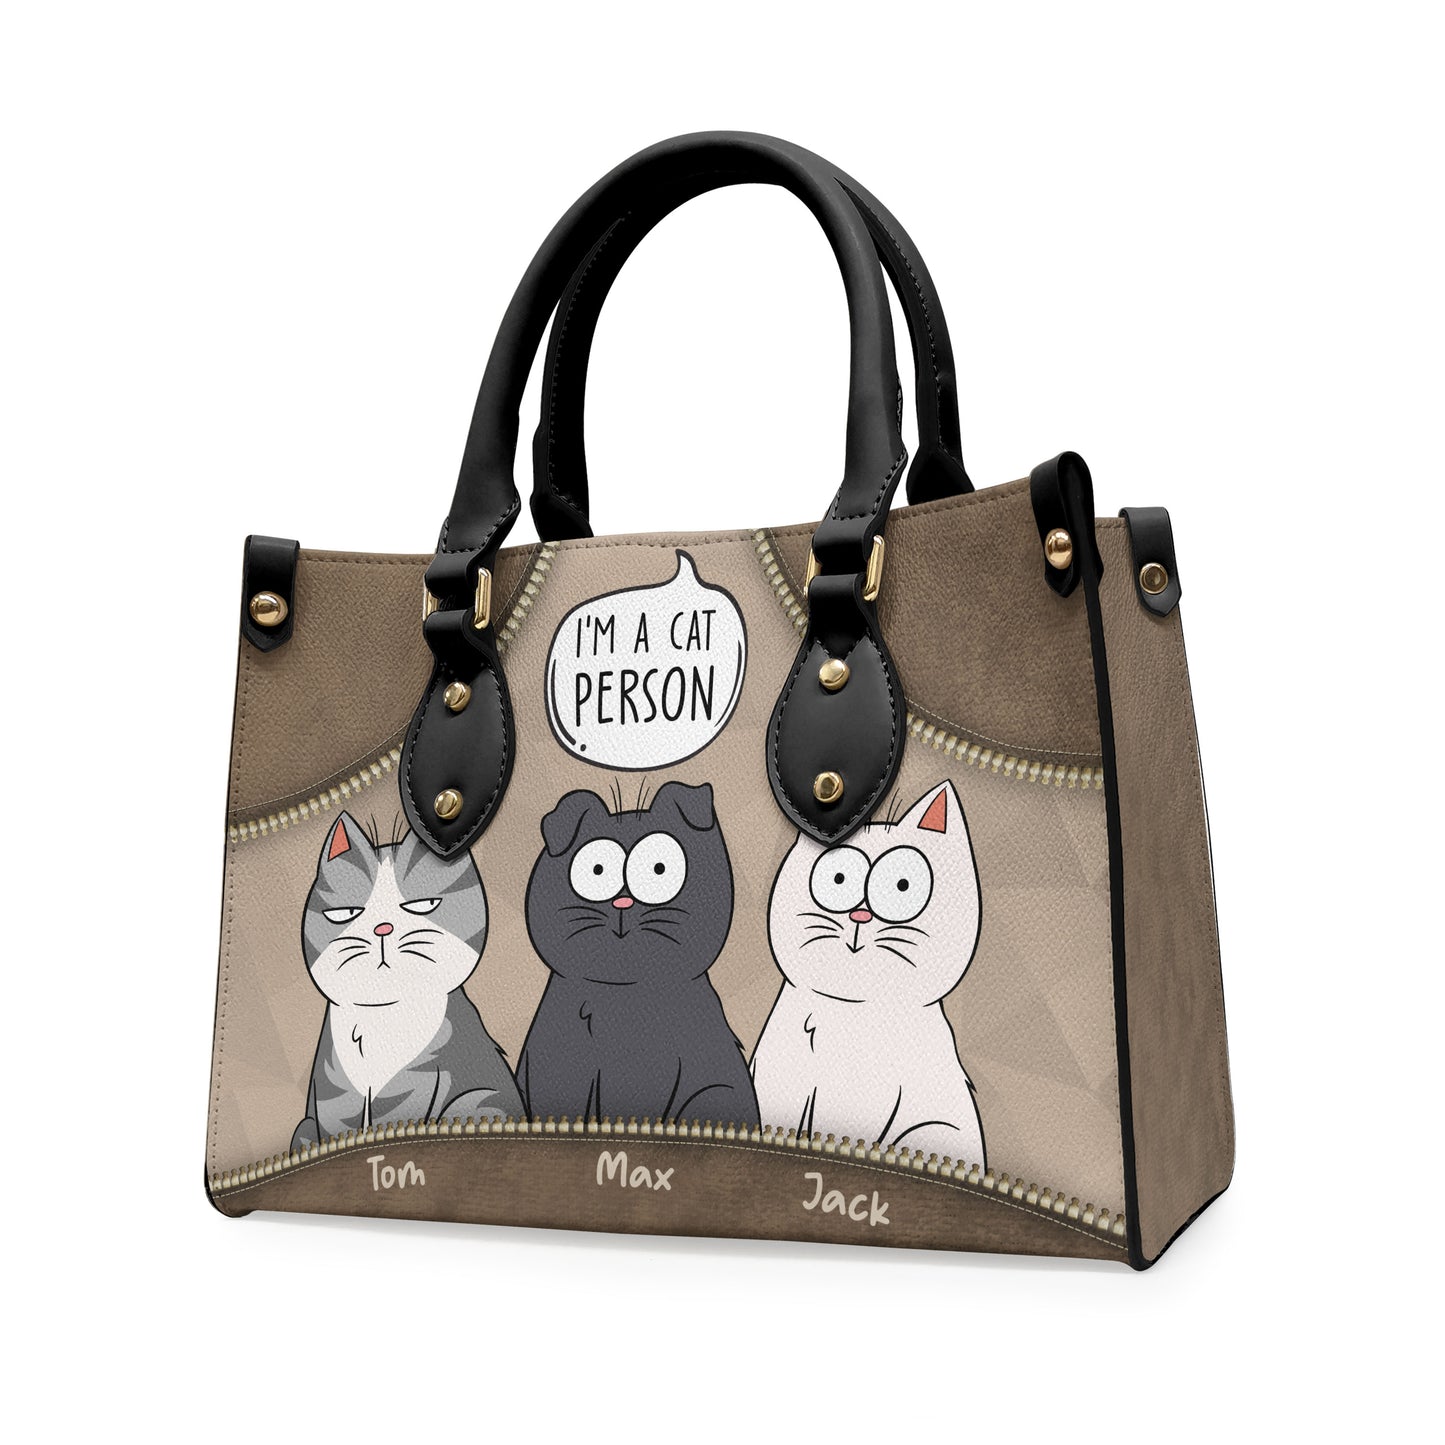 I'm A Cat Person - Personalized Leather Bag